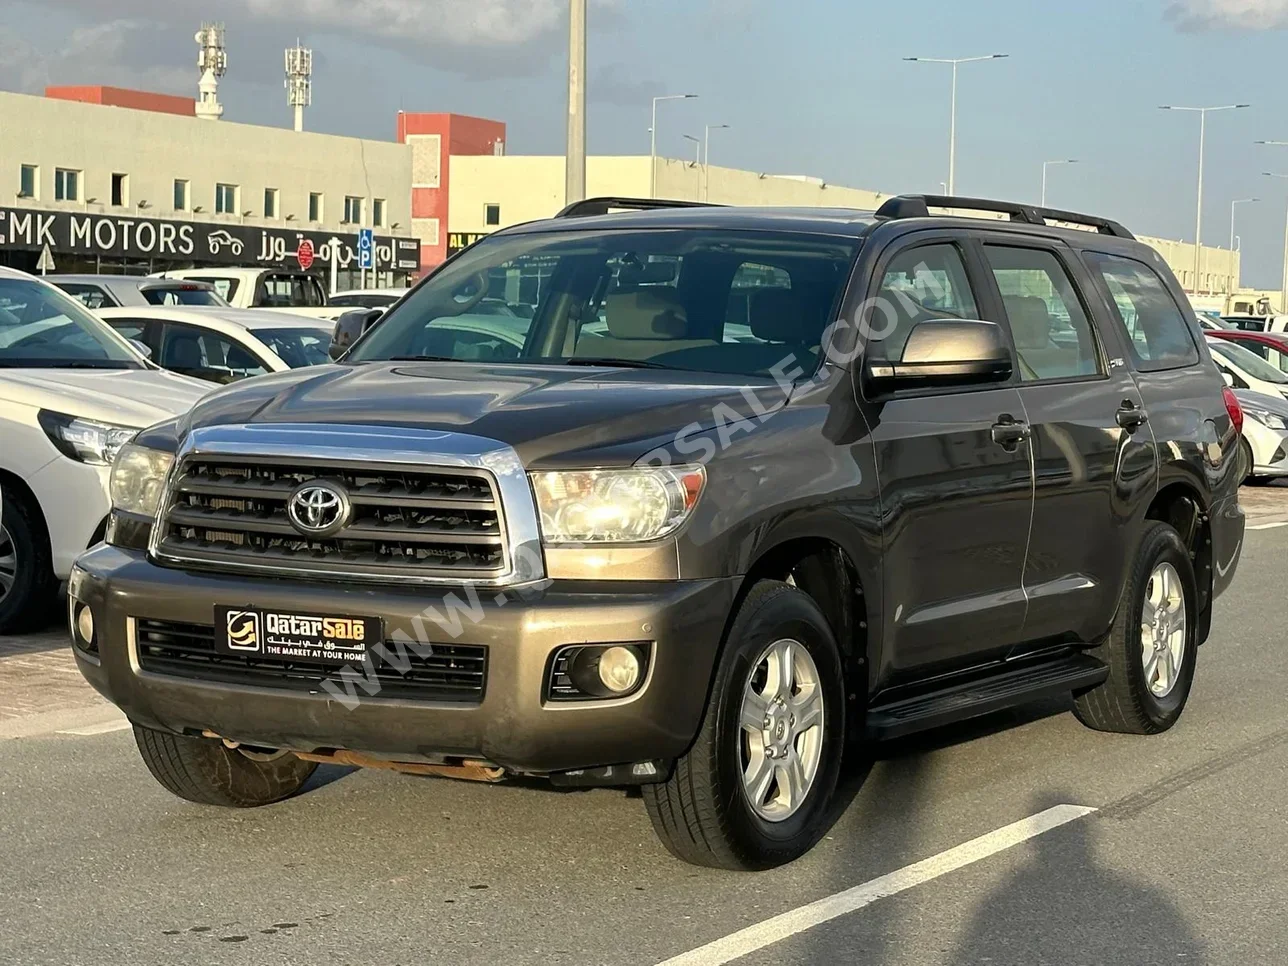 Toyota  Sequoia  SR5  2016  Automatic  130,000 Km  8 Cylinder  Four Wheel Drive (4WD)  SUV  Gray